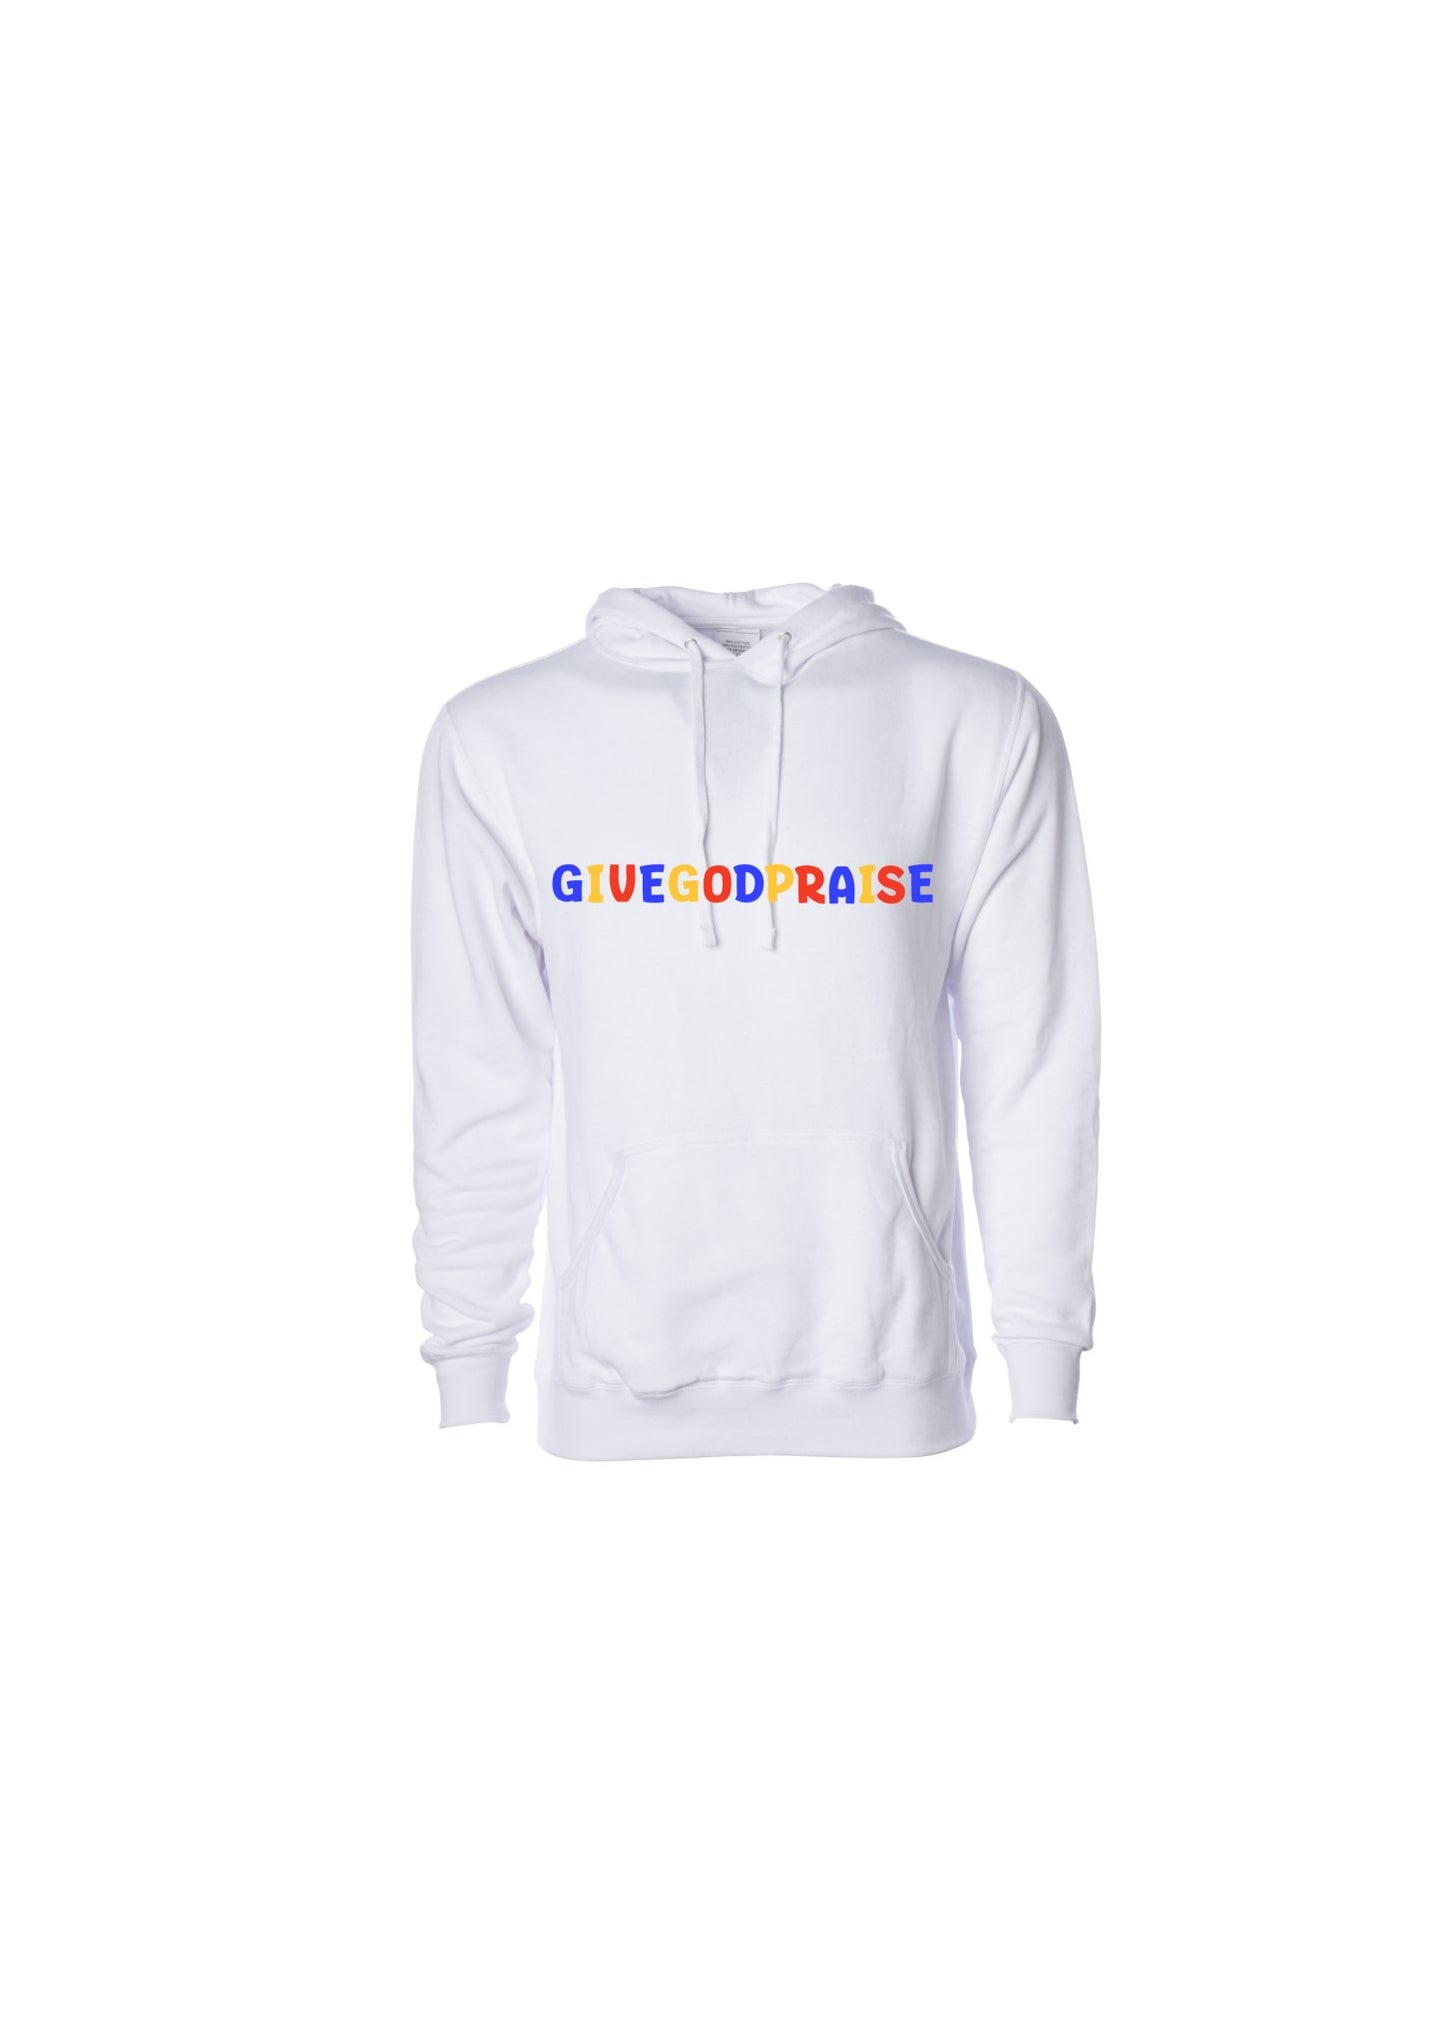 All The Praise Belongs To God Men Hoodie - GiveGodPraiseClothing